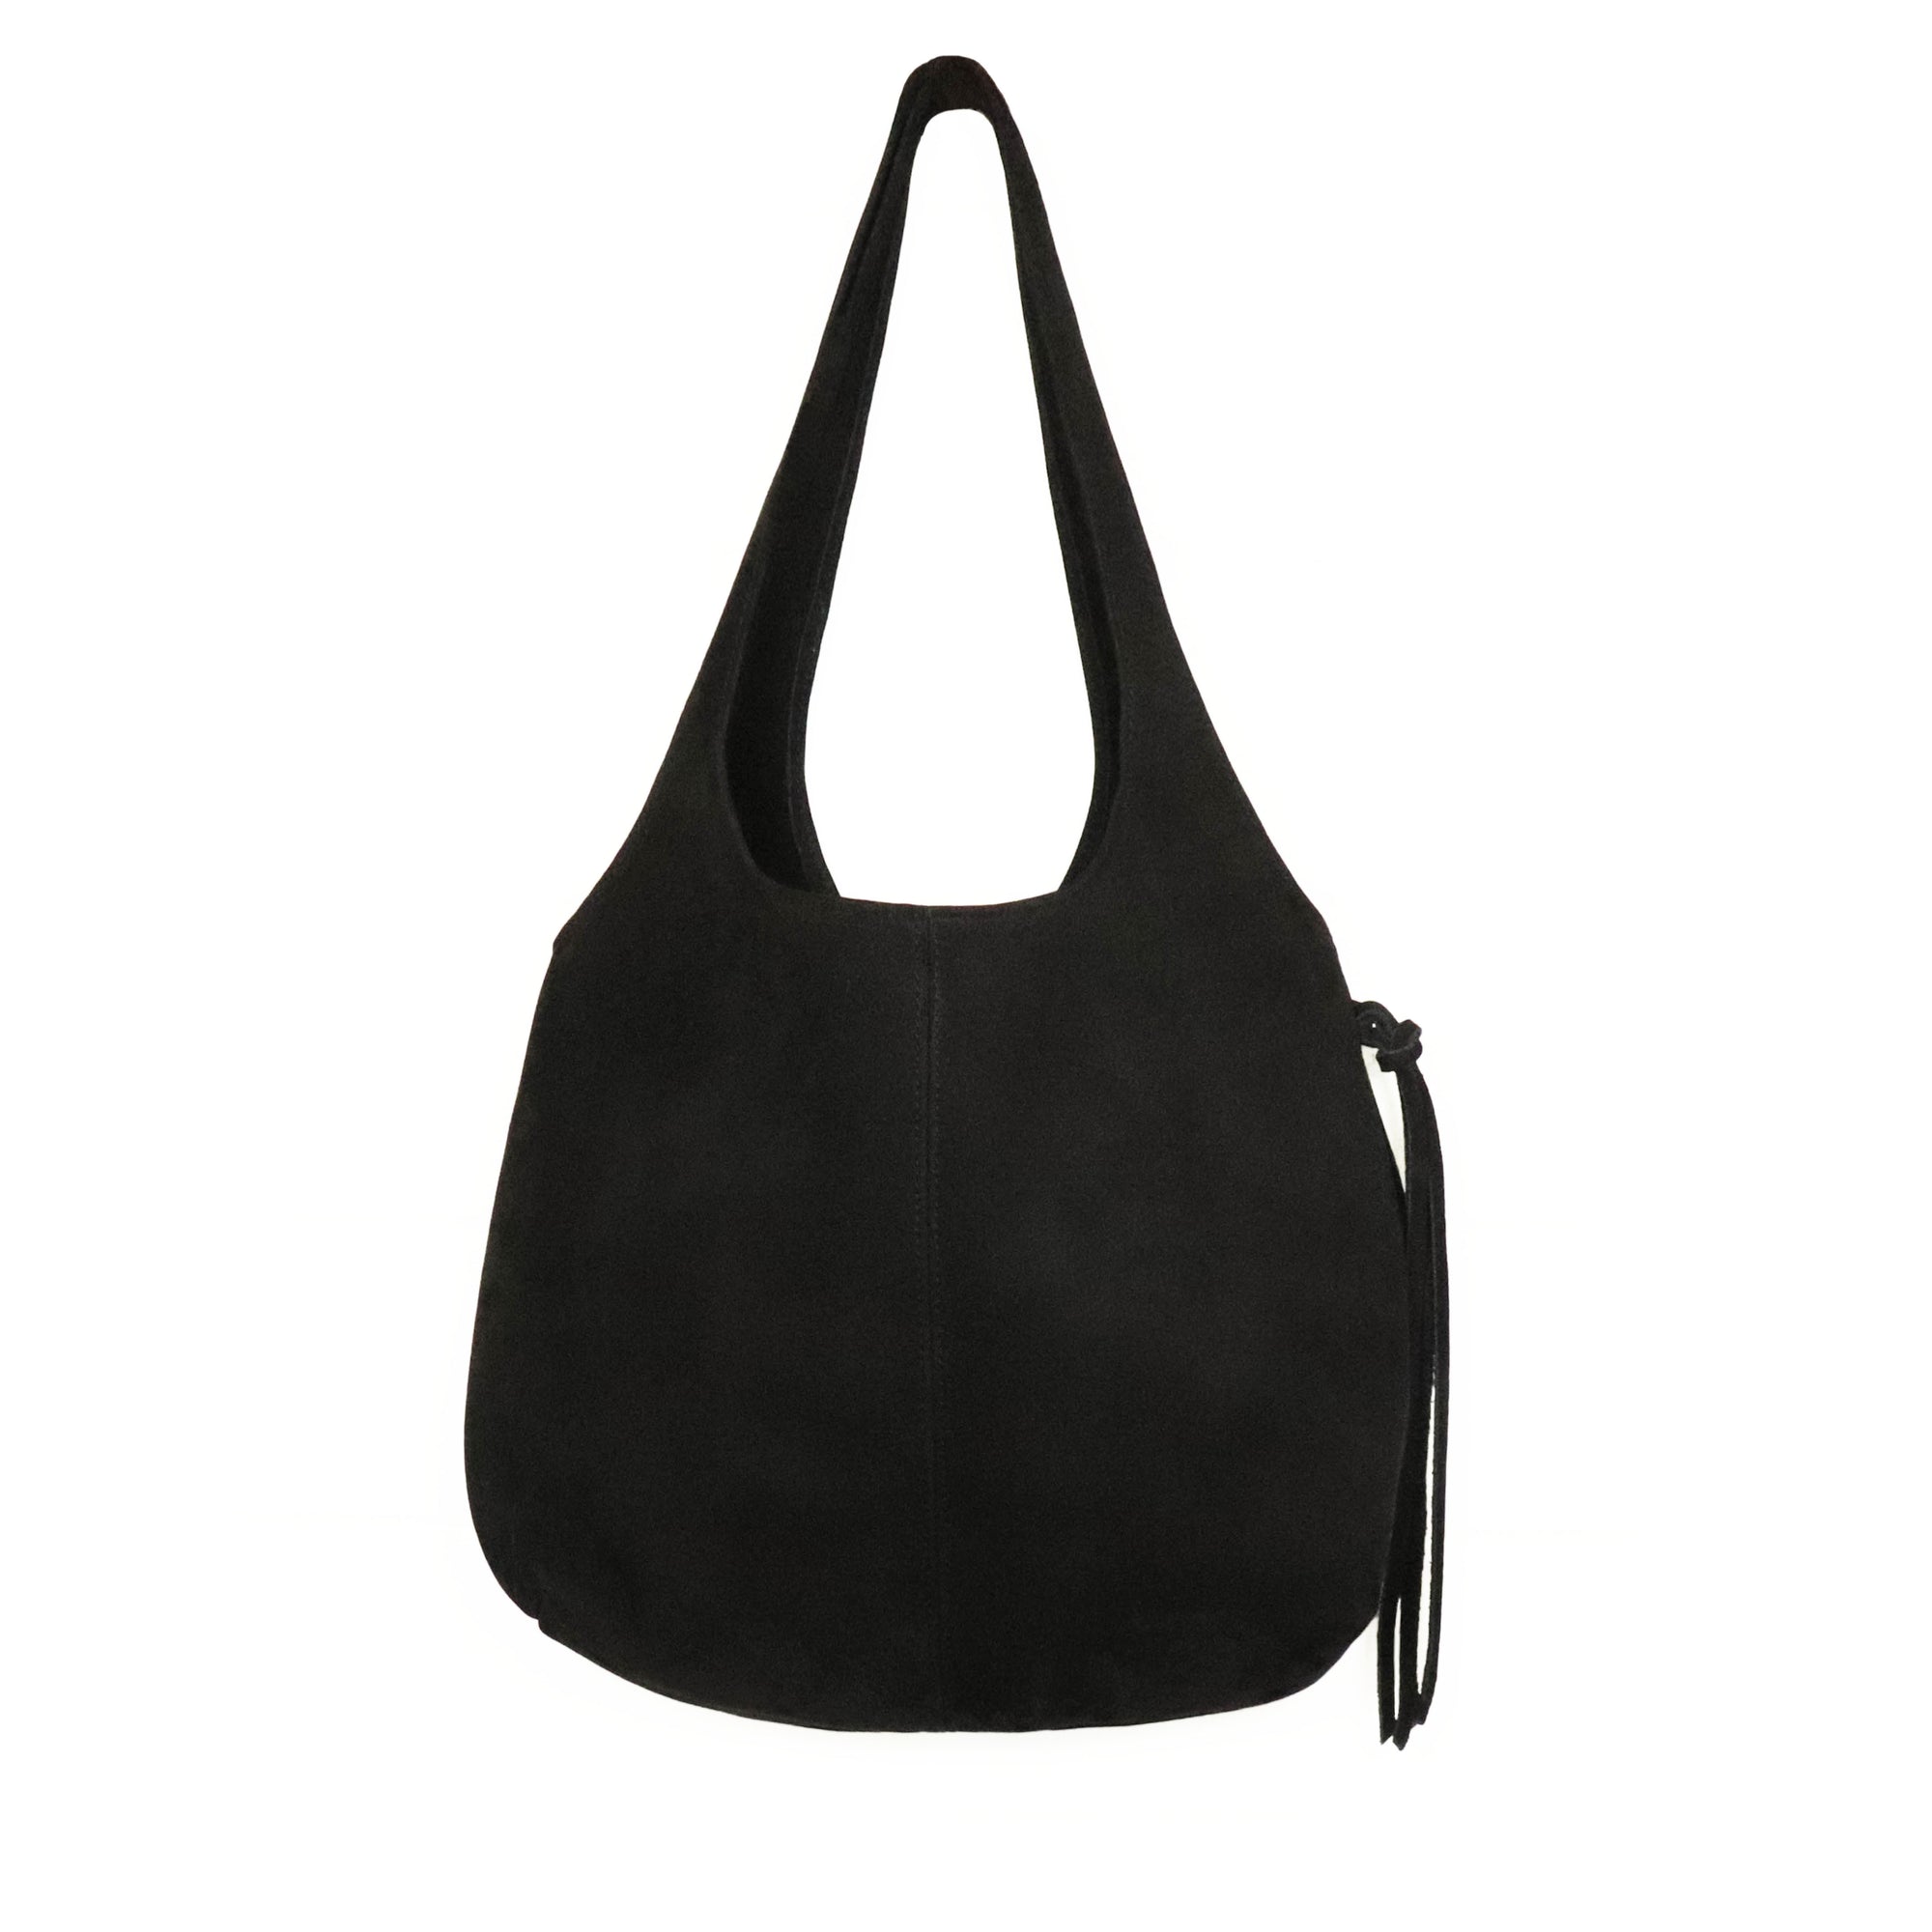 Monterey Hobo - Large hobo style shoulder bag crafted in Onyx leather. Made in U.S.A. by Jana Kay.